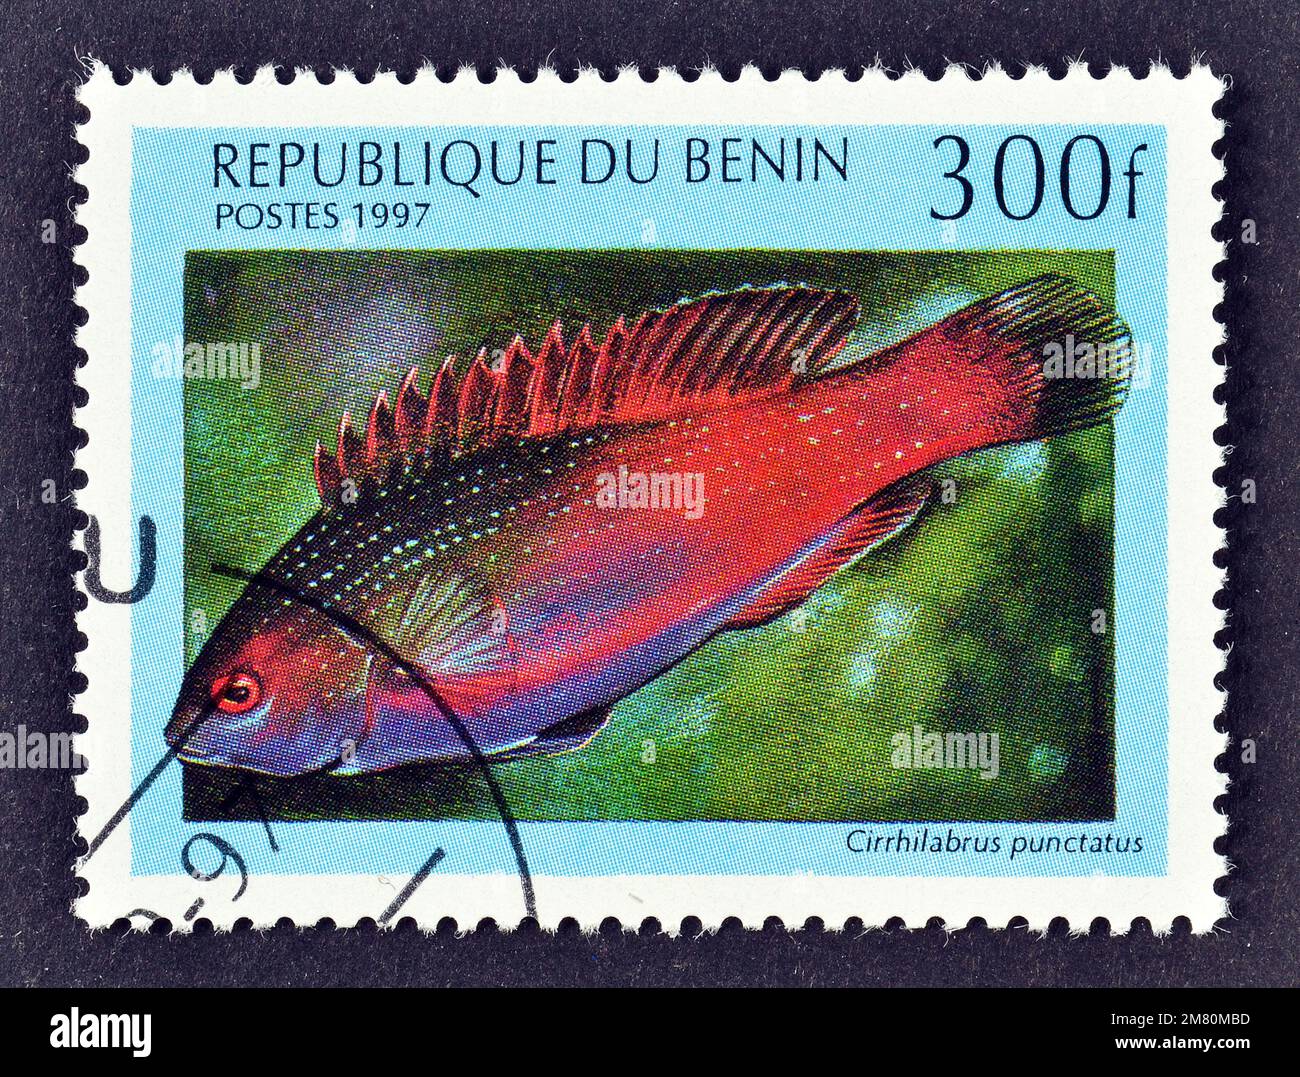 Cancelled postage stamp printed by Benin, that shows Dotted Wrasse (Cirrhilabrus punctatus), circa 1997. Stock Photo